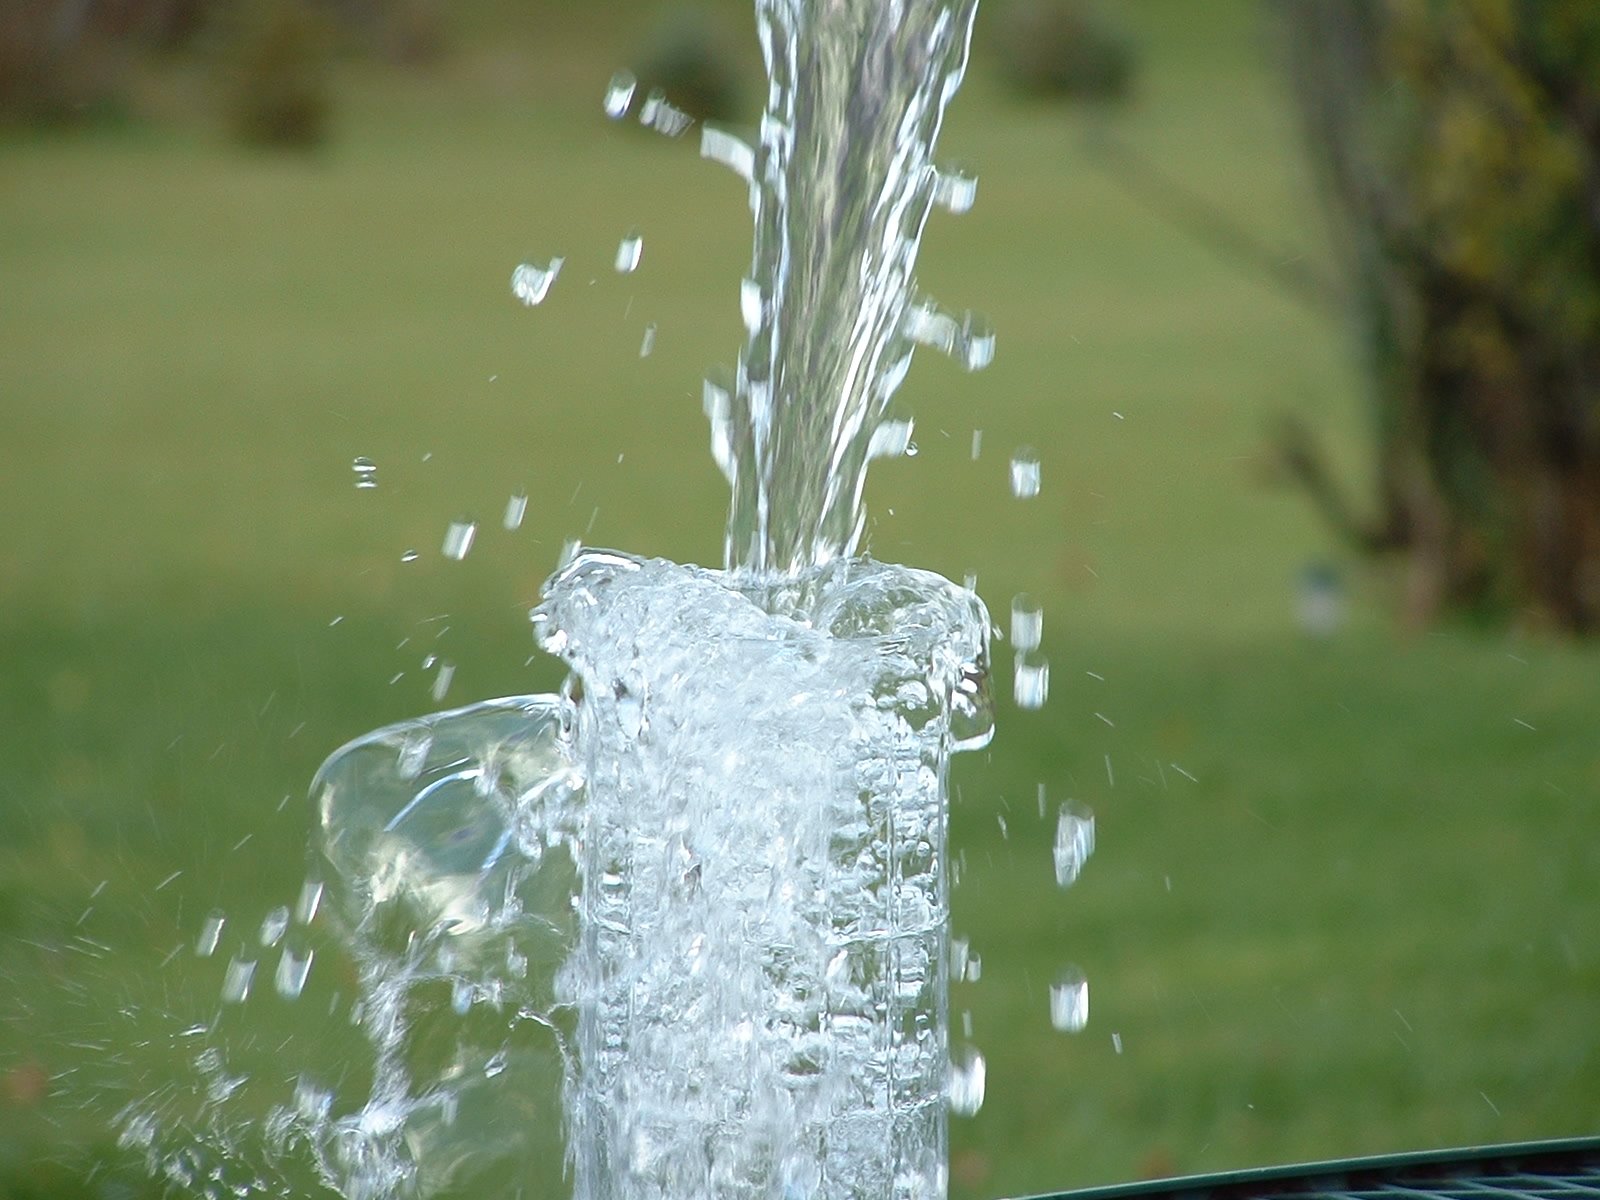 water pouring into a glass in the shape of a vase